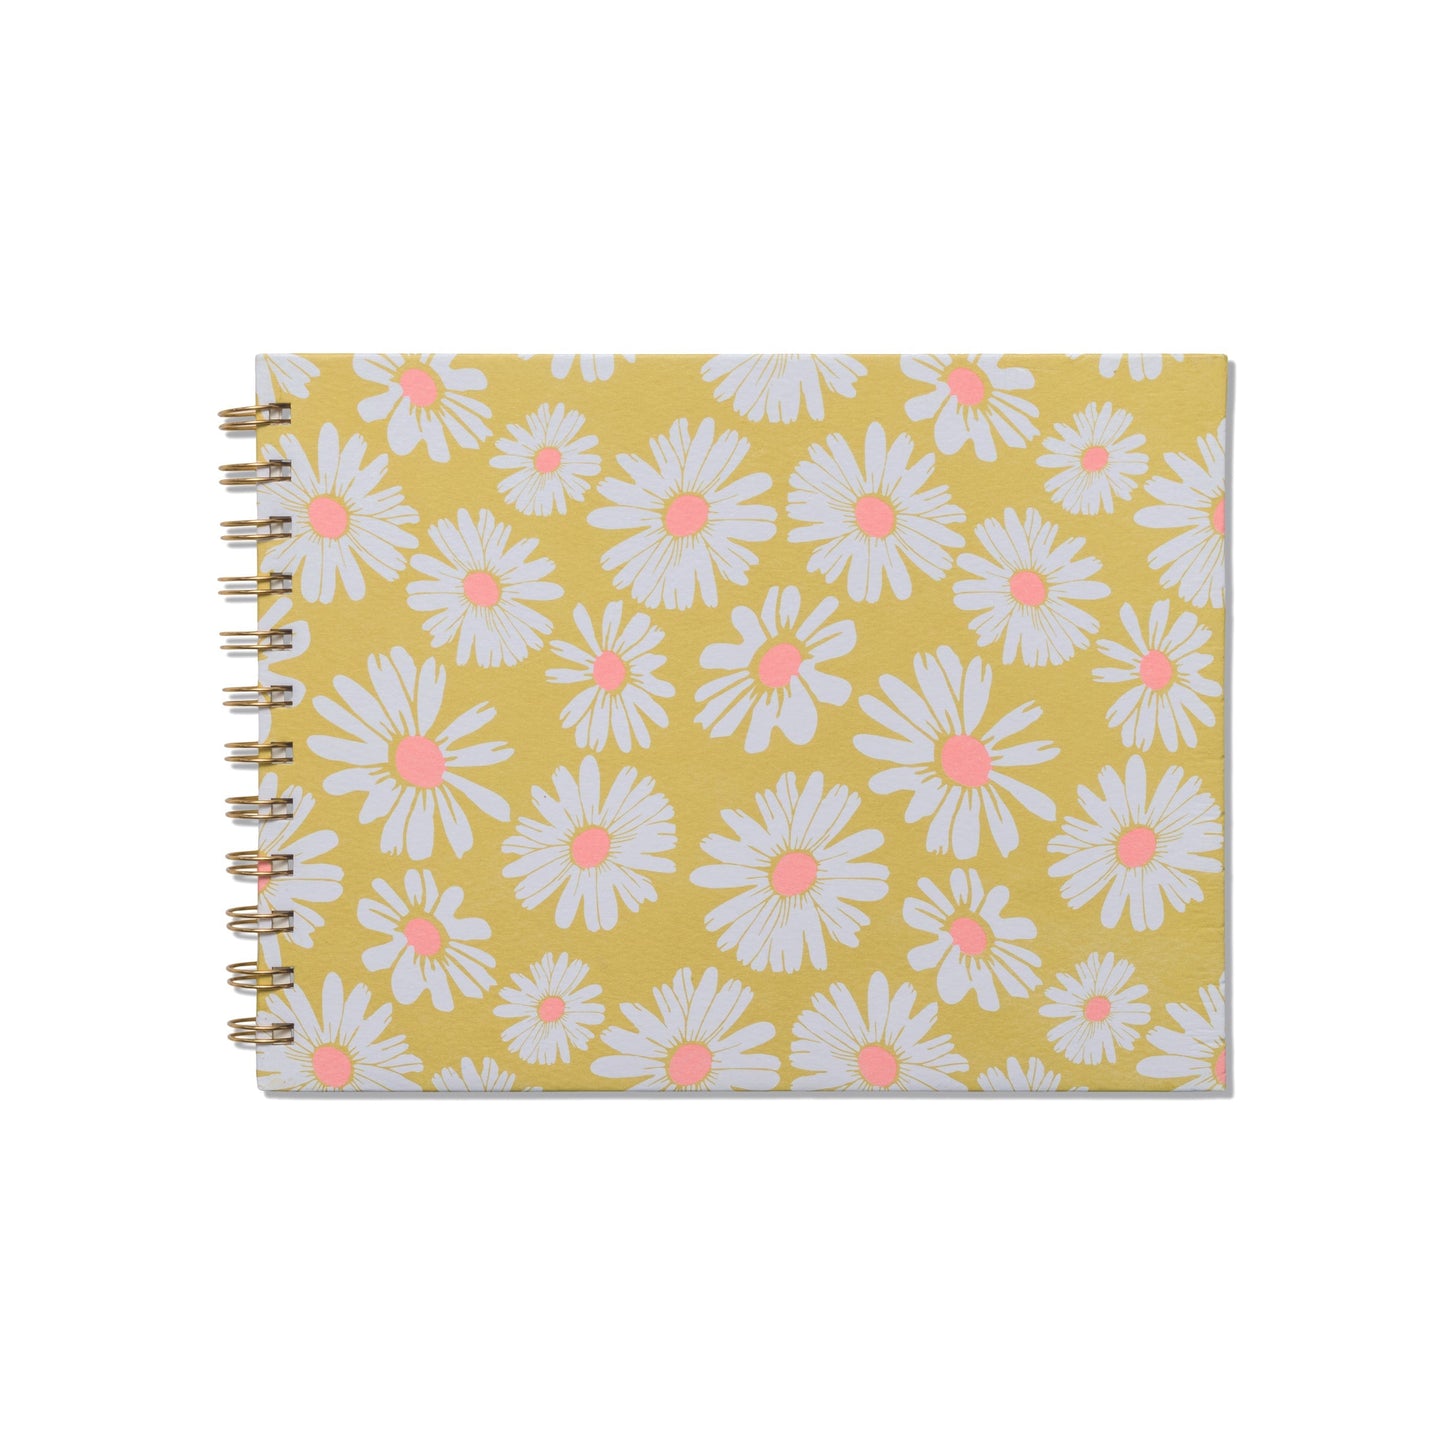 Yellow planner with daises illustrated on exterior.